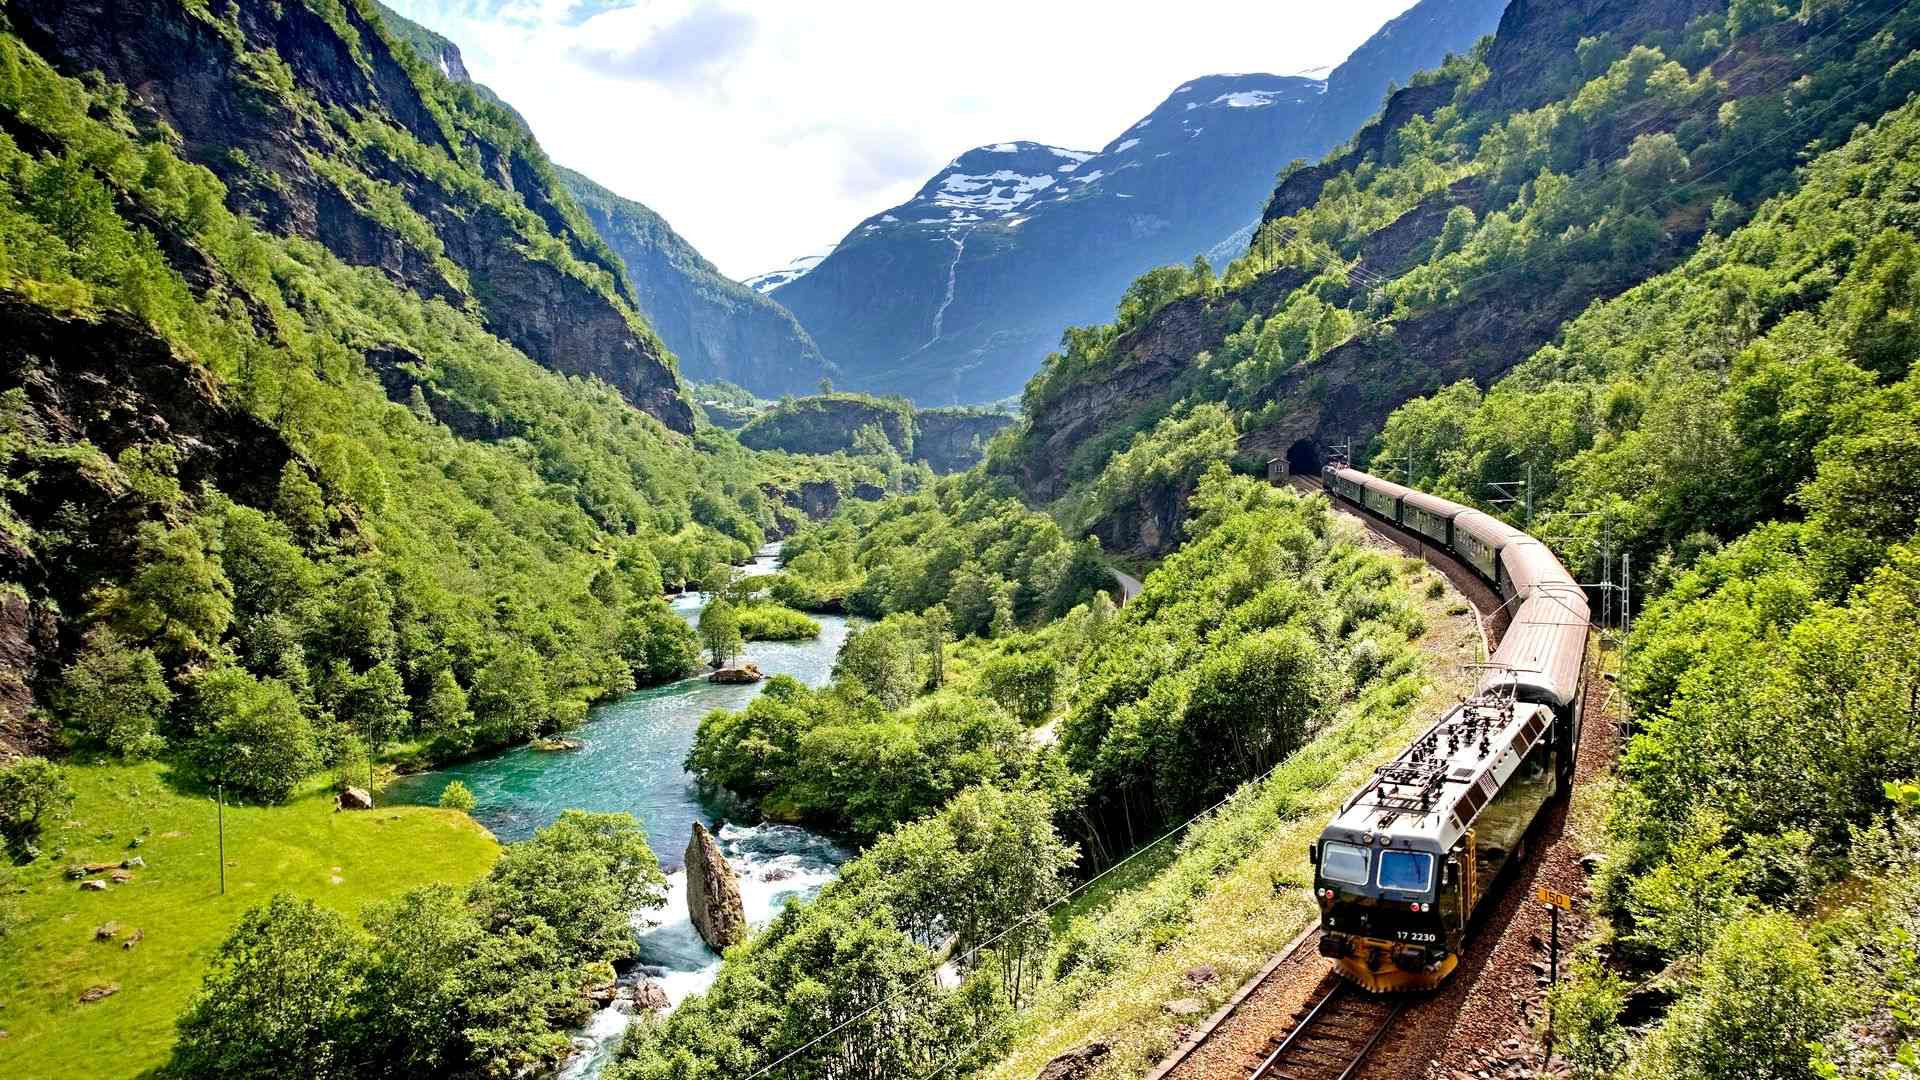 The Flåm railway curving around the green mountains in Norway